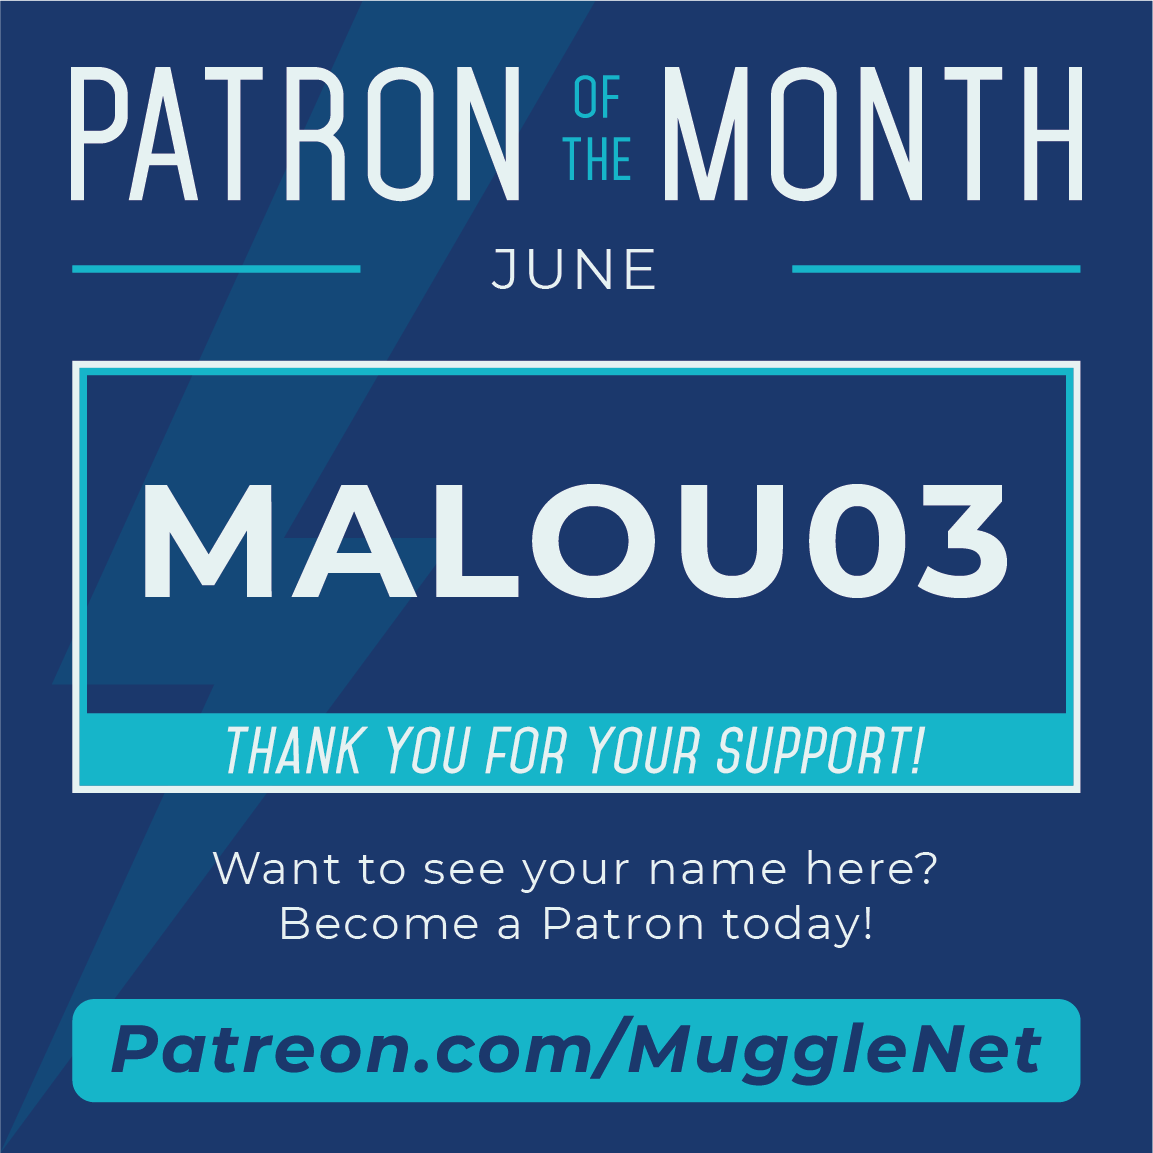 Patron of the Month, June, Malou03